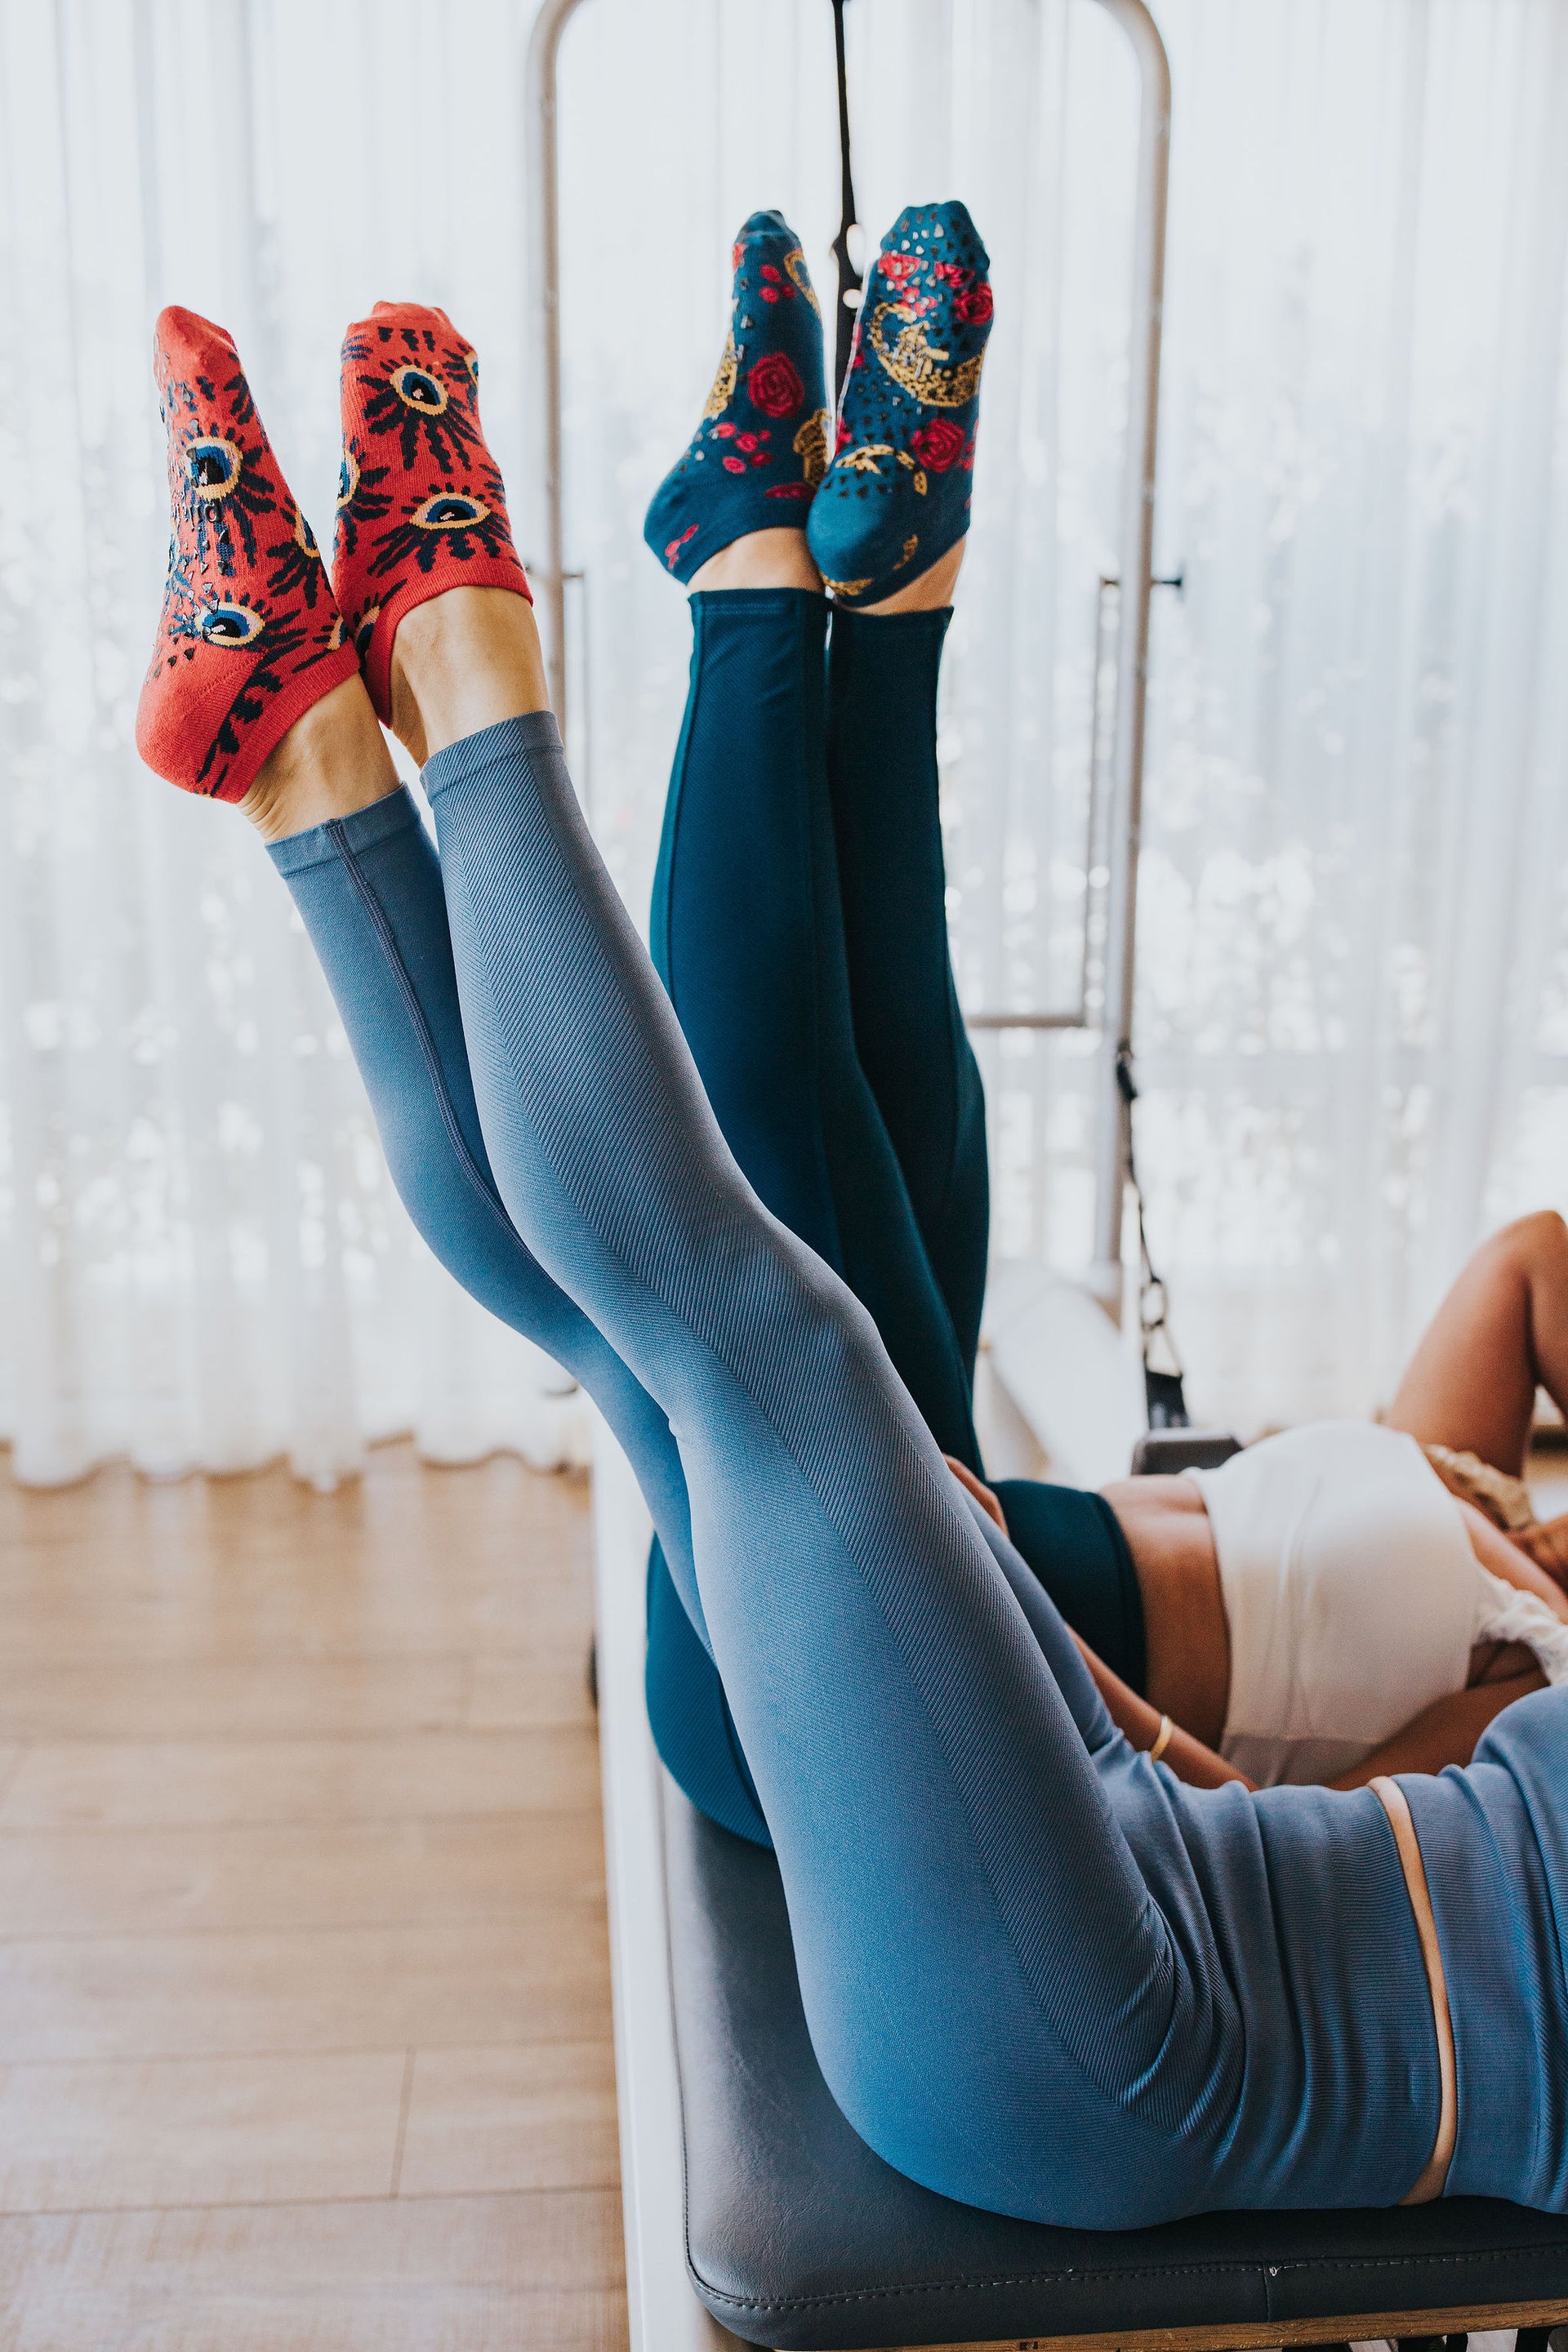 Maximize Grip and Stability with our Pilates Grip Socks Collection